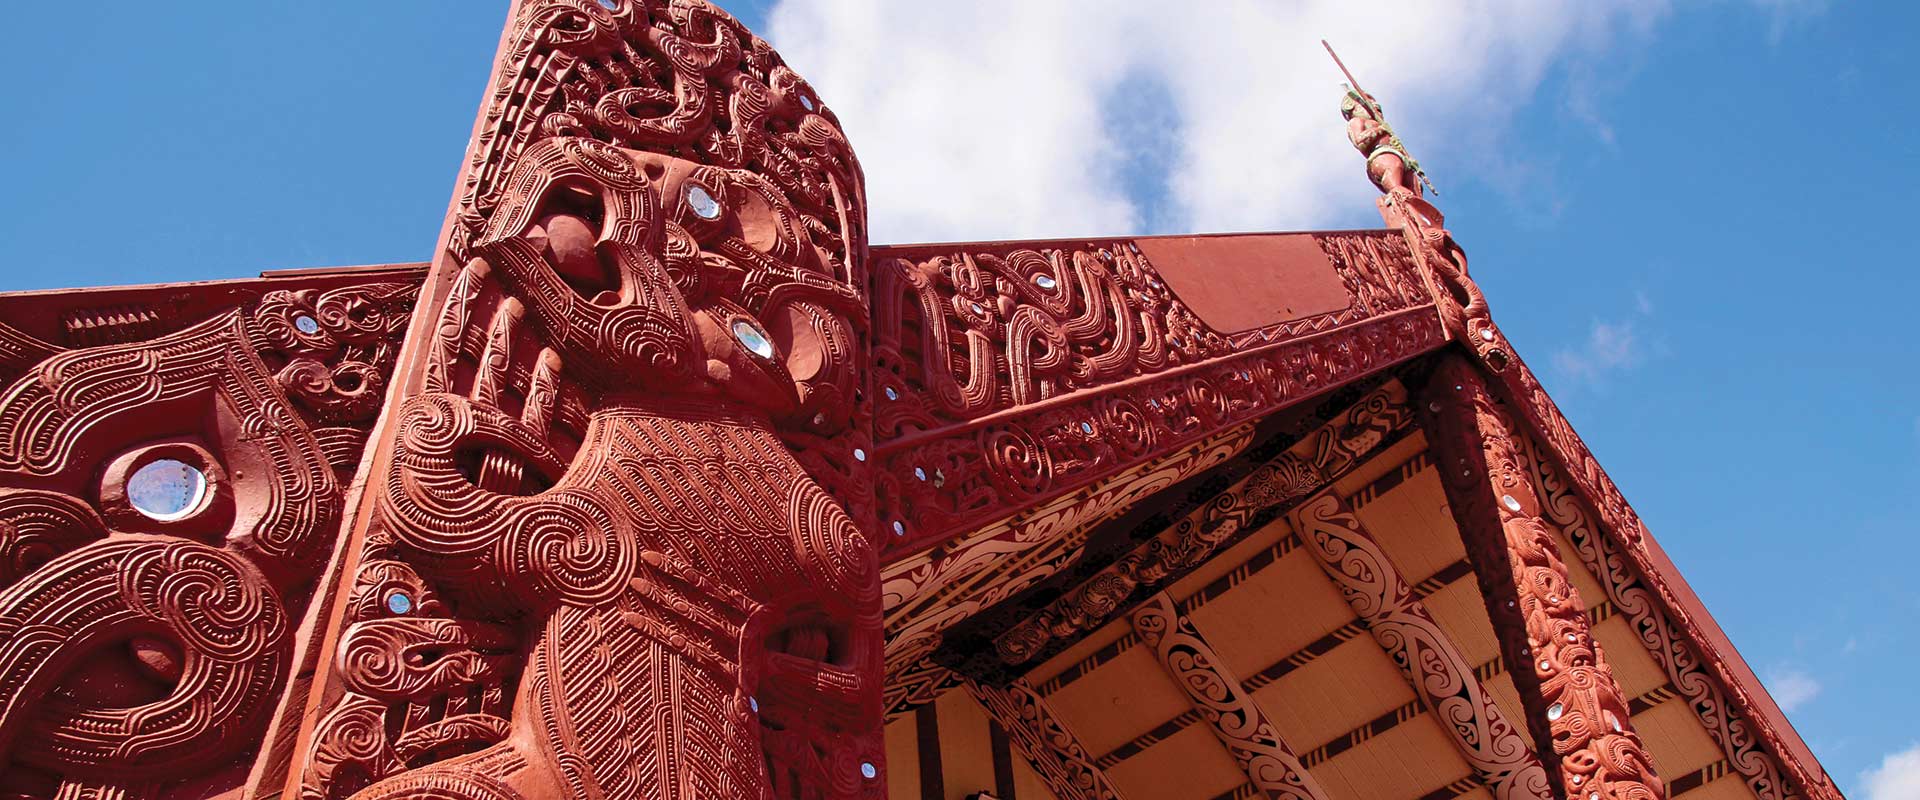 Intricately carved detail on Maori building used for meeting place